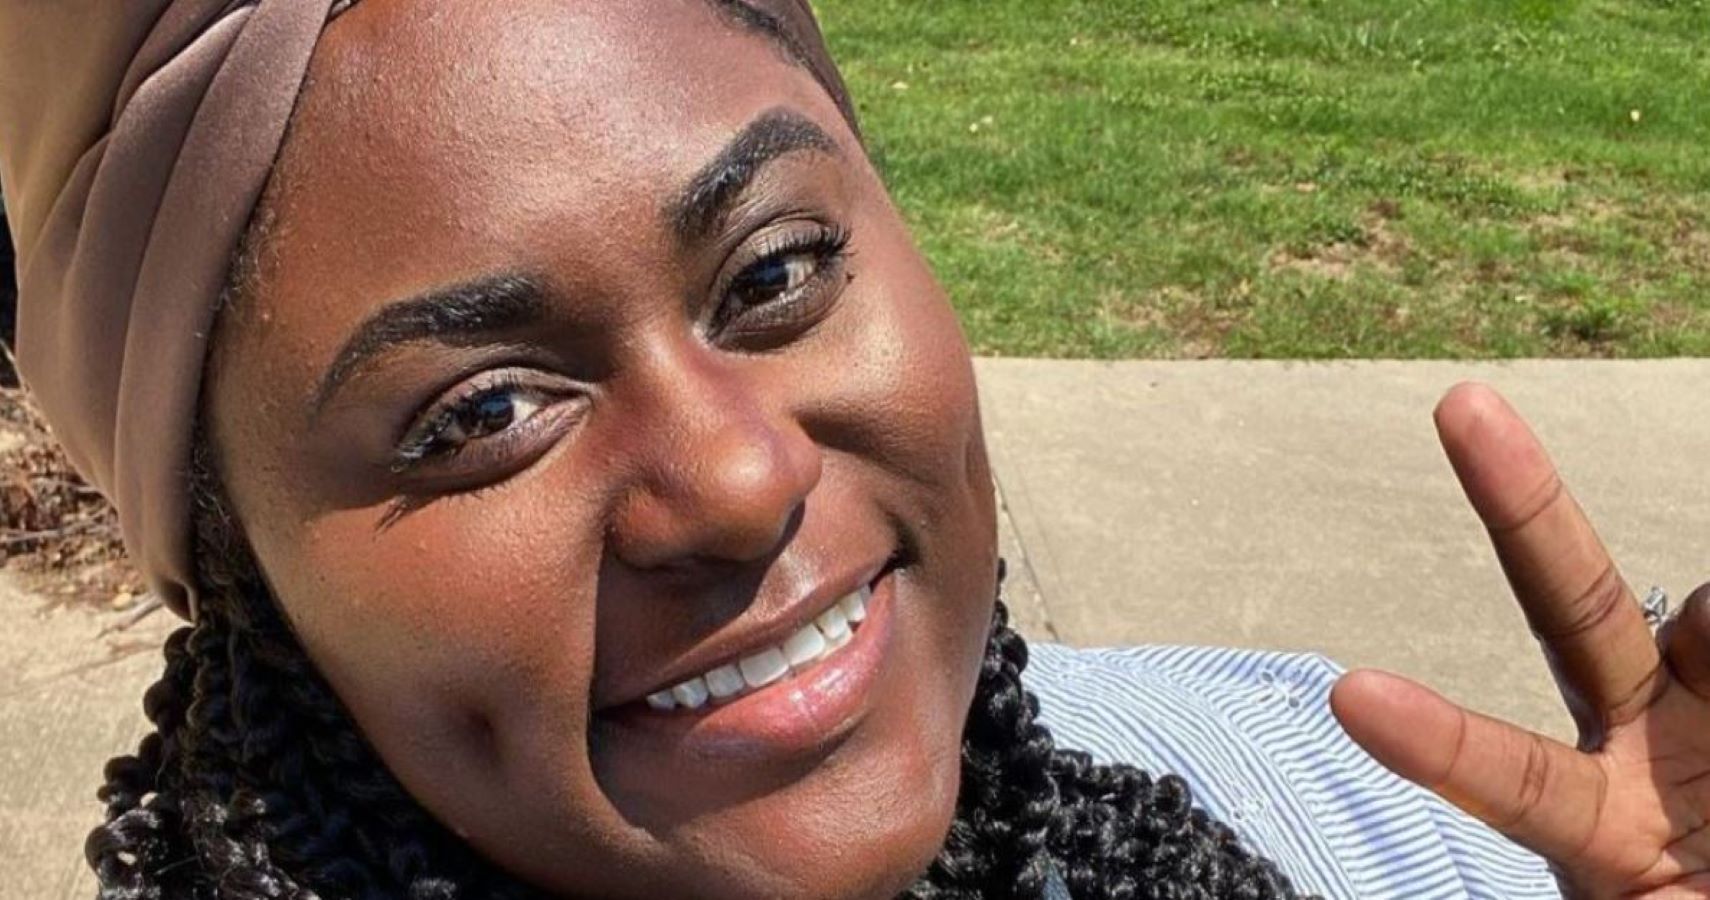 ‘OITNB’ Star Danielle Brooks Opens Up About Having An Emergency C-Section